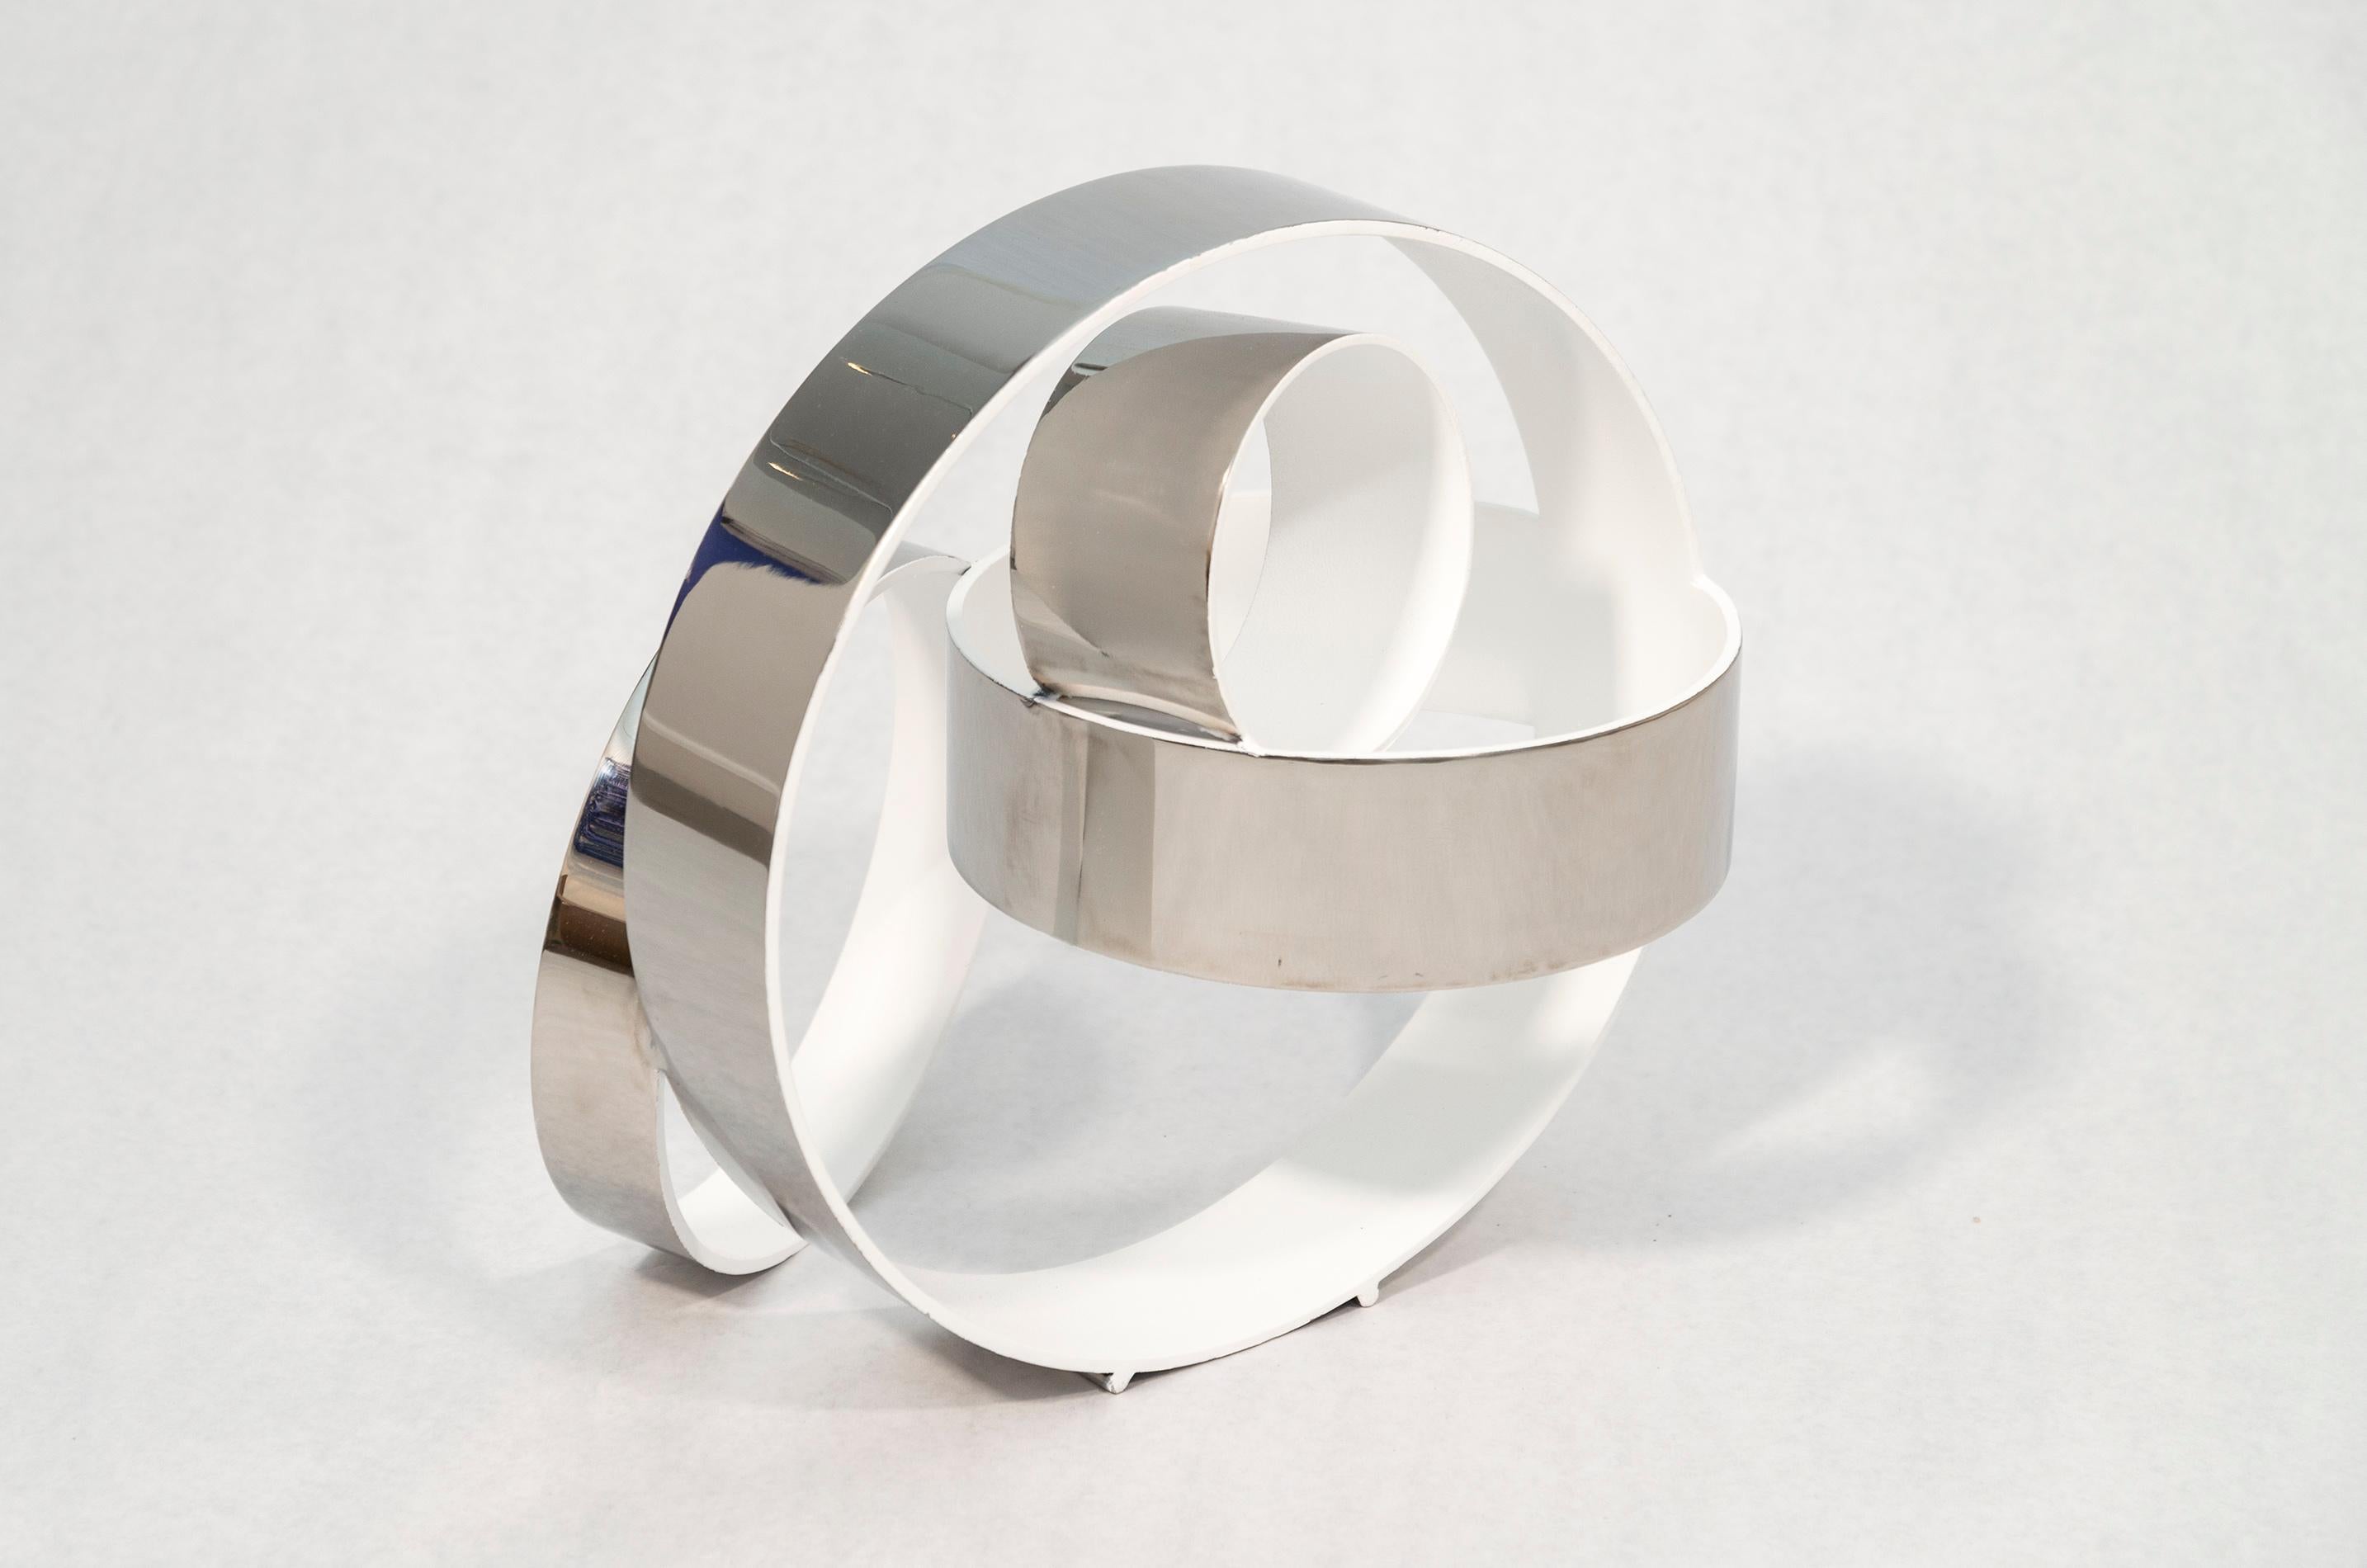 Four Ring Temps Zero Small White 1/10 - abstract, stainless steel, sculpture - Contemporary Sculpture by Philippe Pallafray